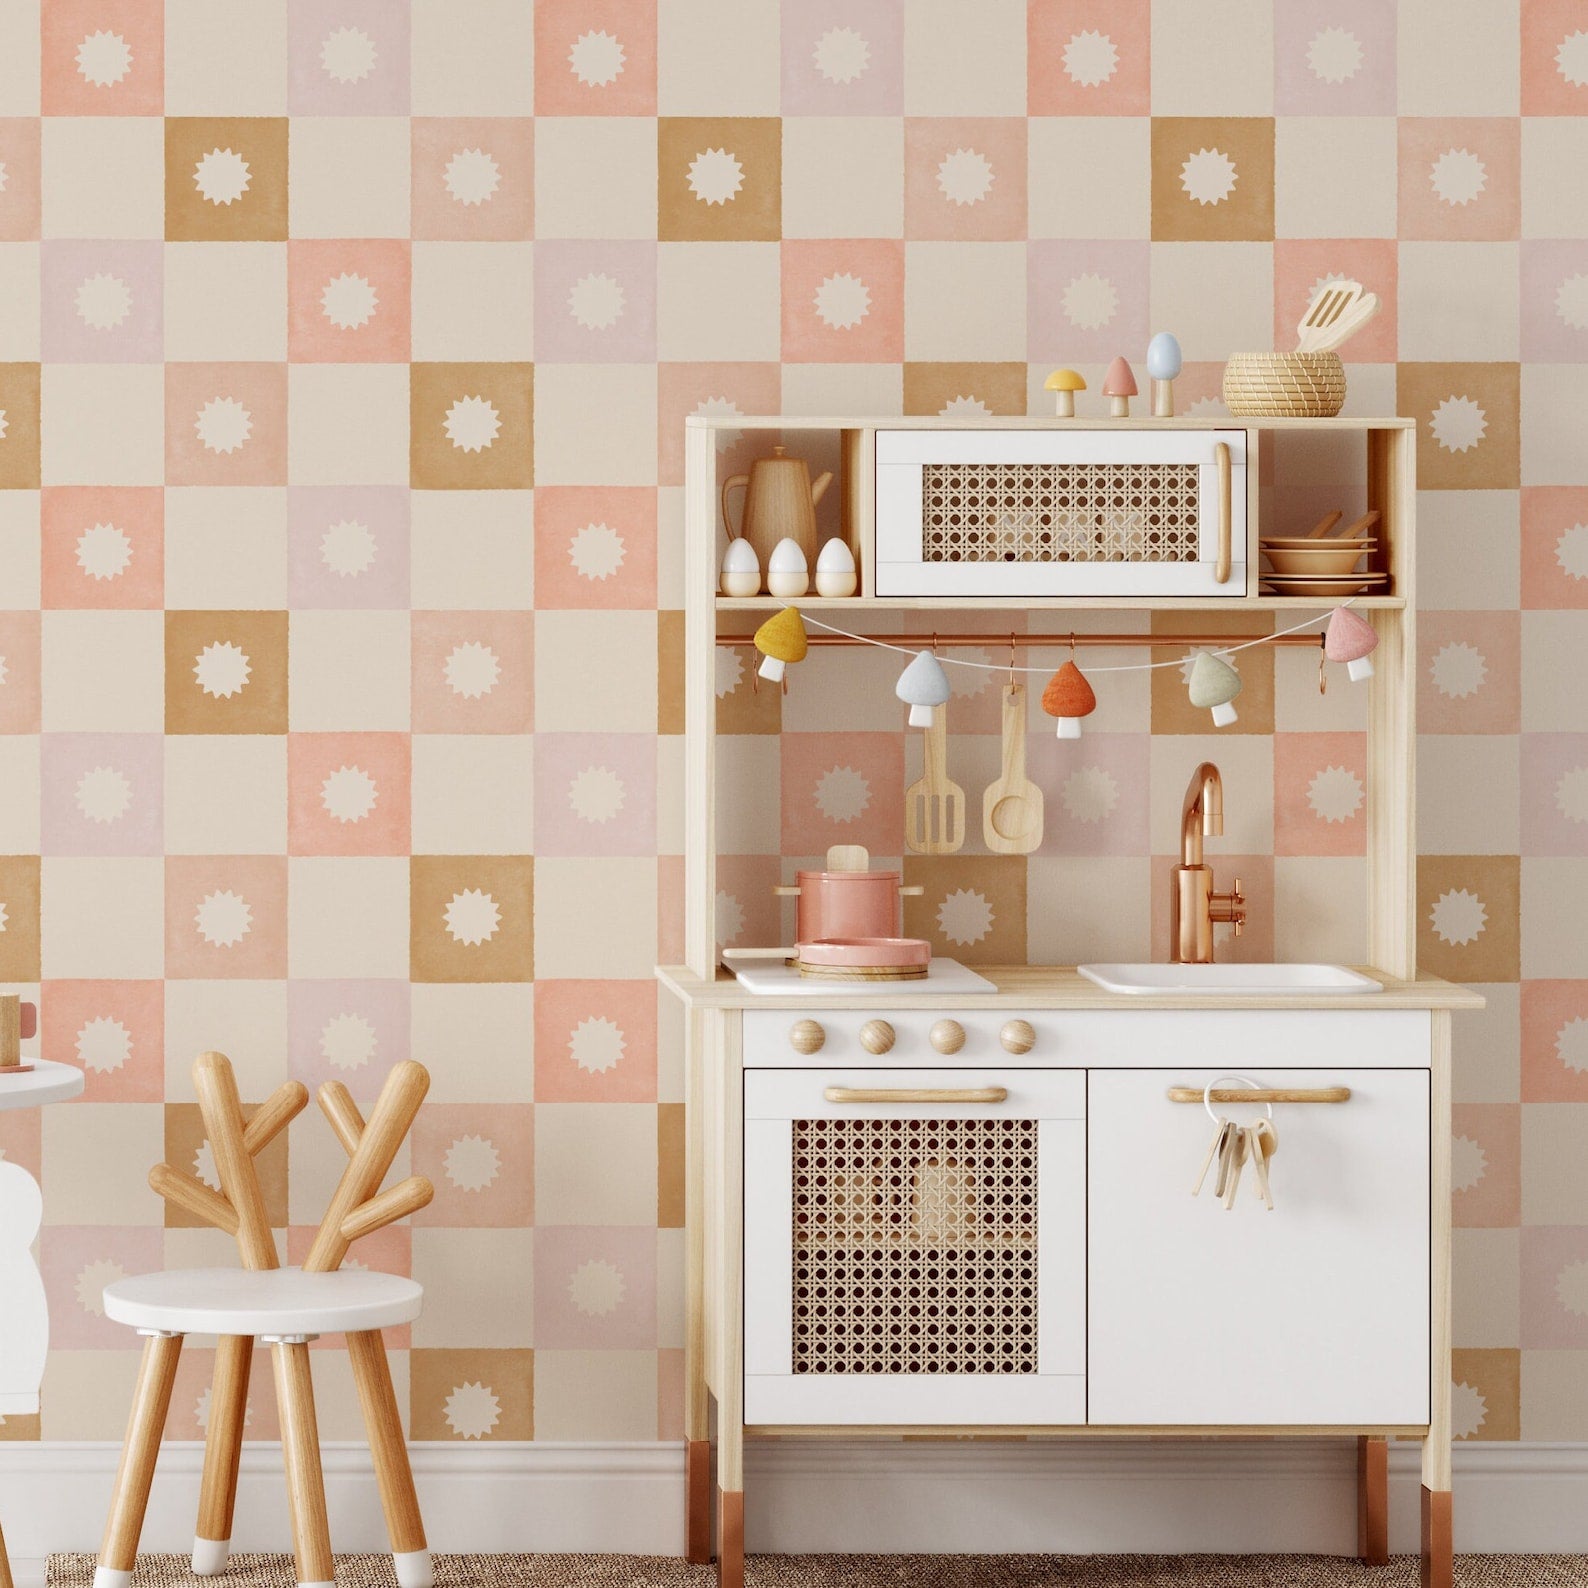 Children’s play area decorated with Coralie Wallpaper, featuring pastel-toned squares and sunburst patterns. The space is furnished with a small wooden play kitchen and child-sized furniture, making it bright and cheerful.